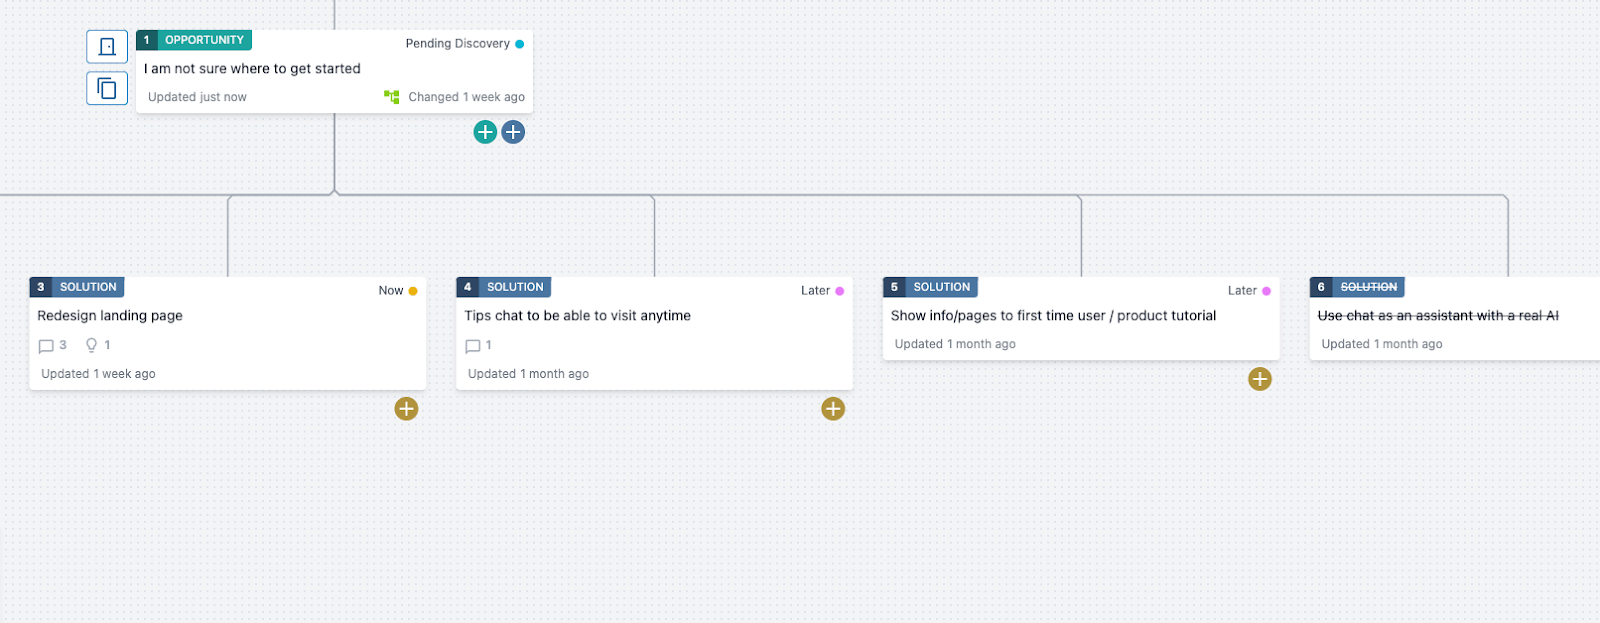 A screenshot of the top of an opportunity solution tree in Vistaly.